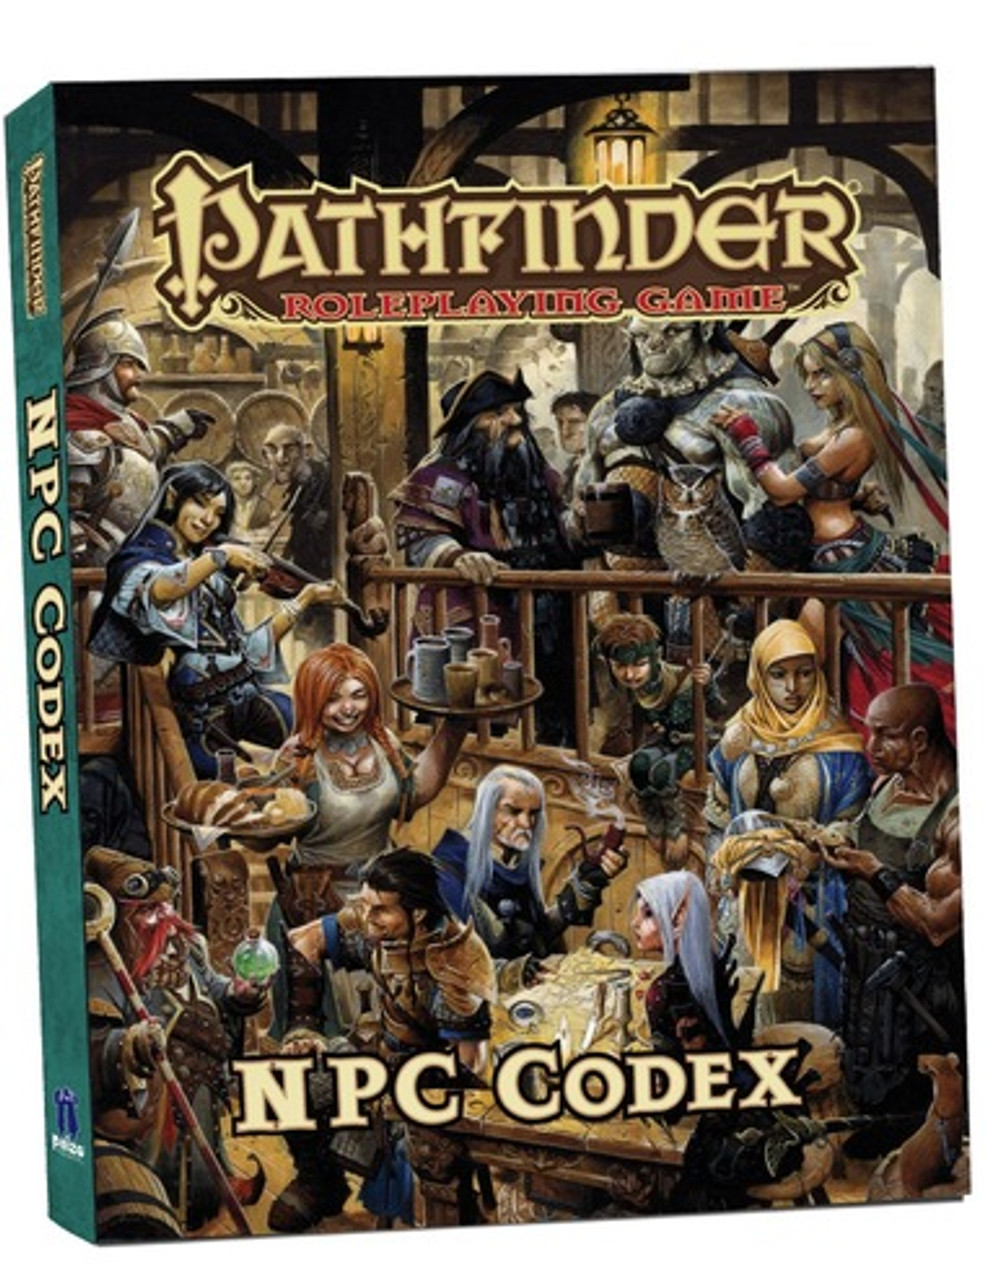 Monster Codex Pocket Edition Pathfinder Roleplaying Game